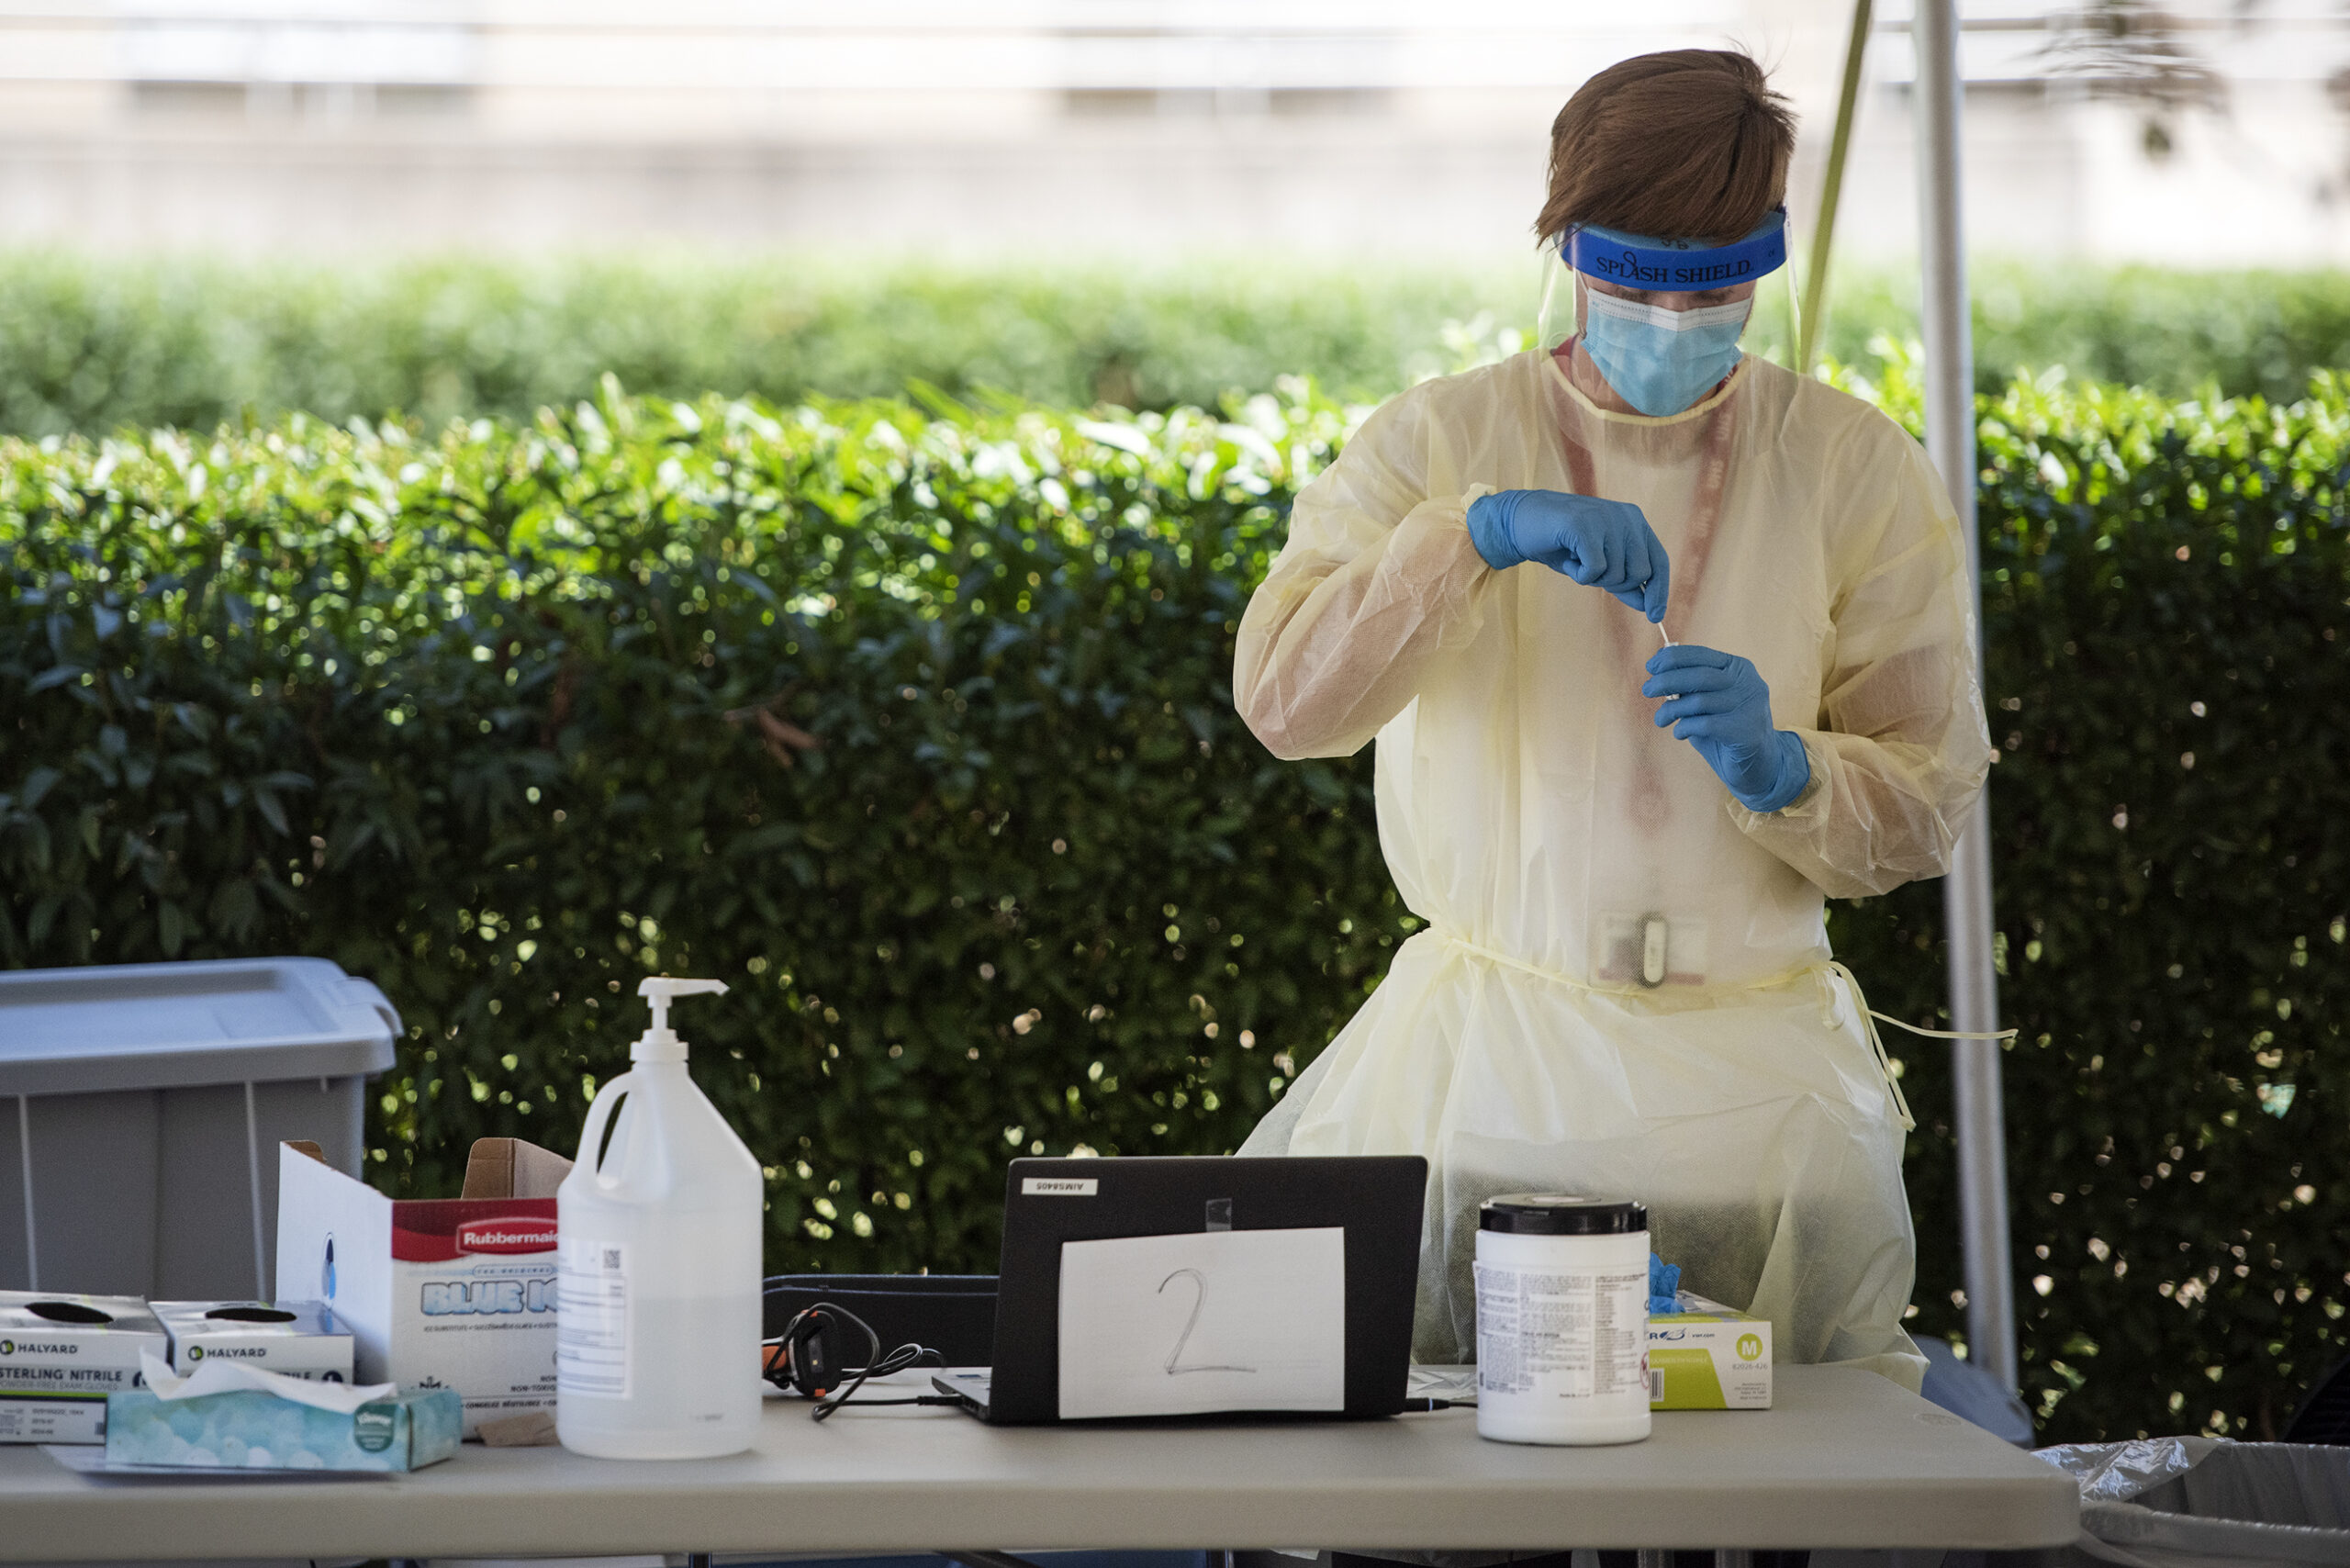 A man in a face mask, face shield, gown, and gloves handles a COVID-19 test at an outdoor testing facility under a tent